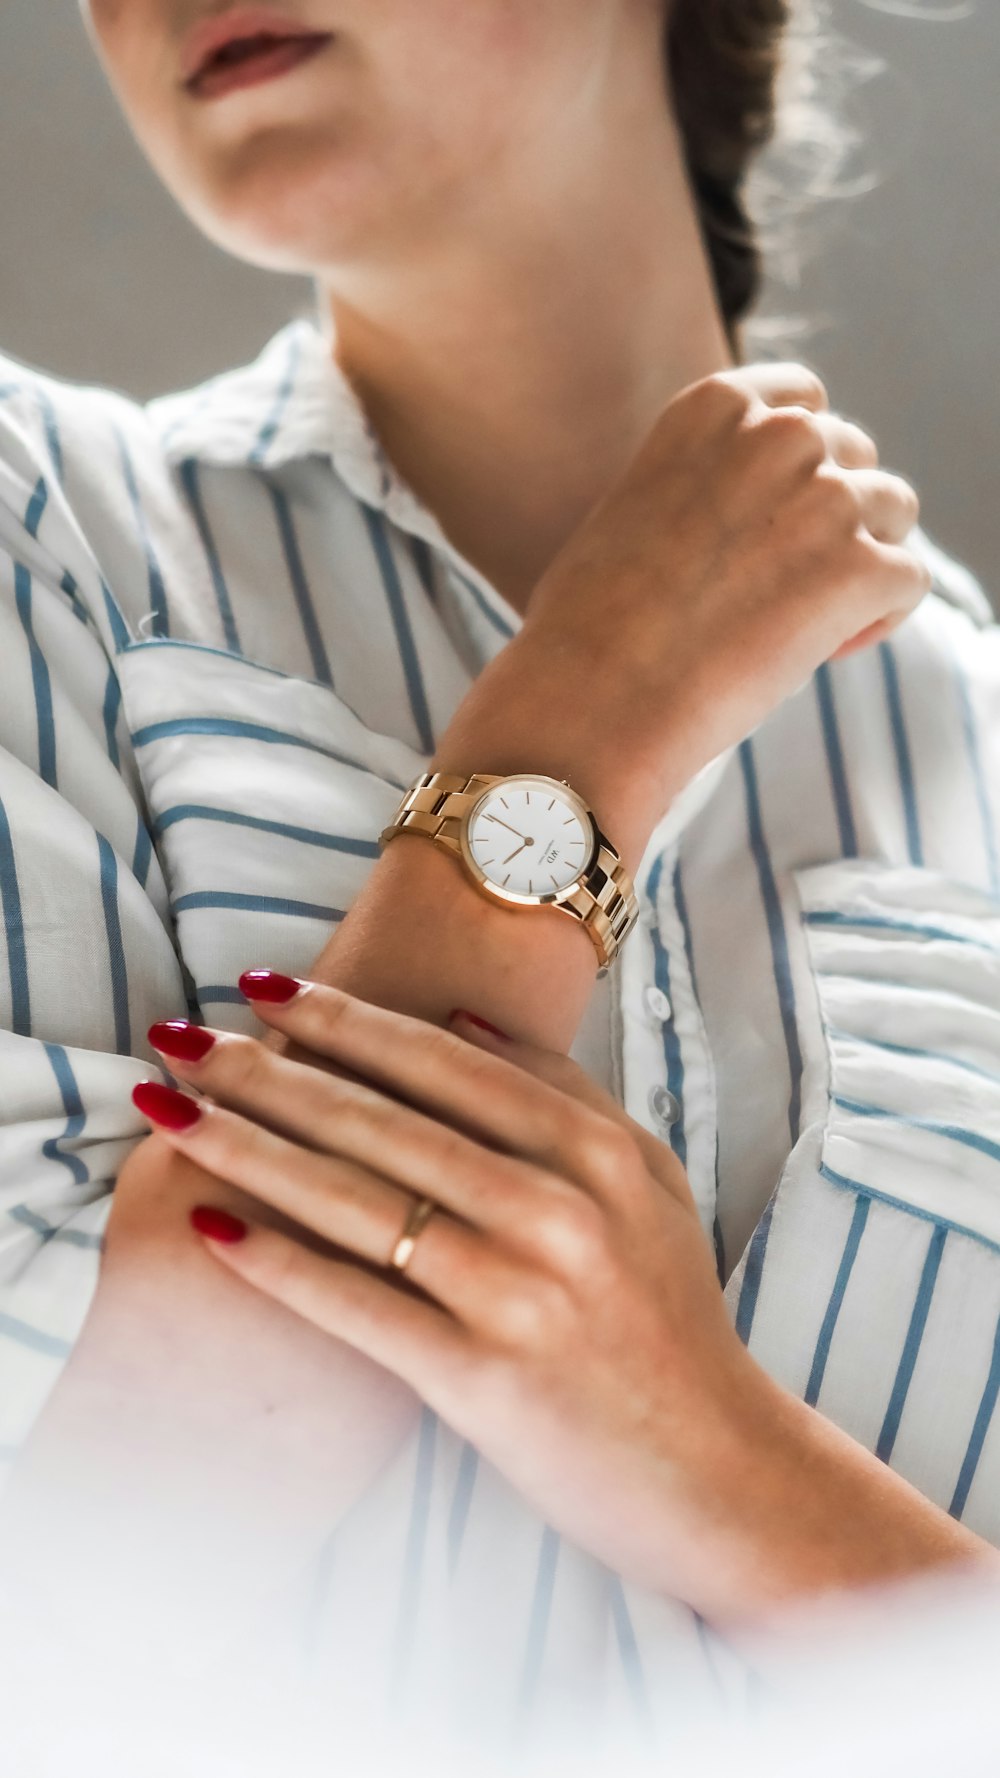 person wearing silver and gold analog watch